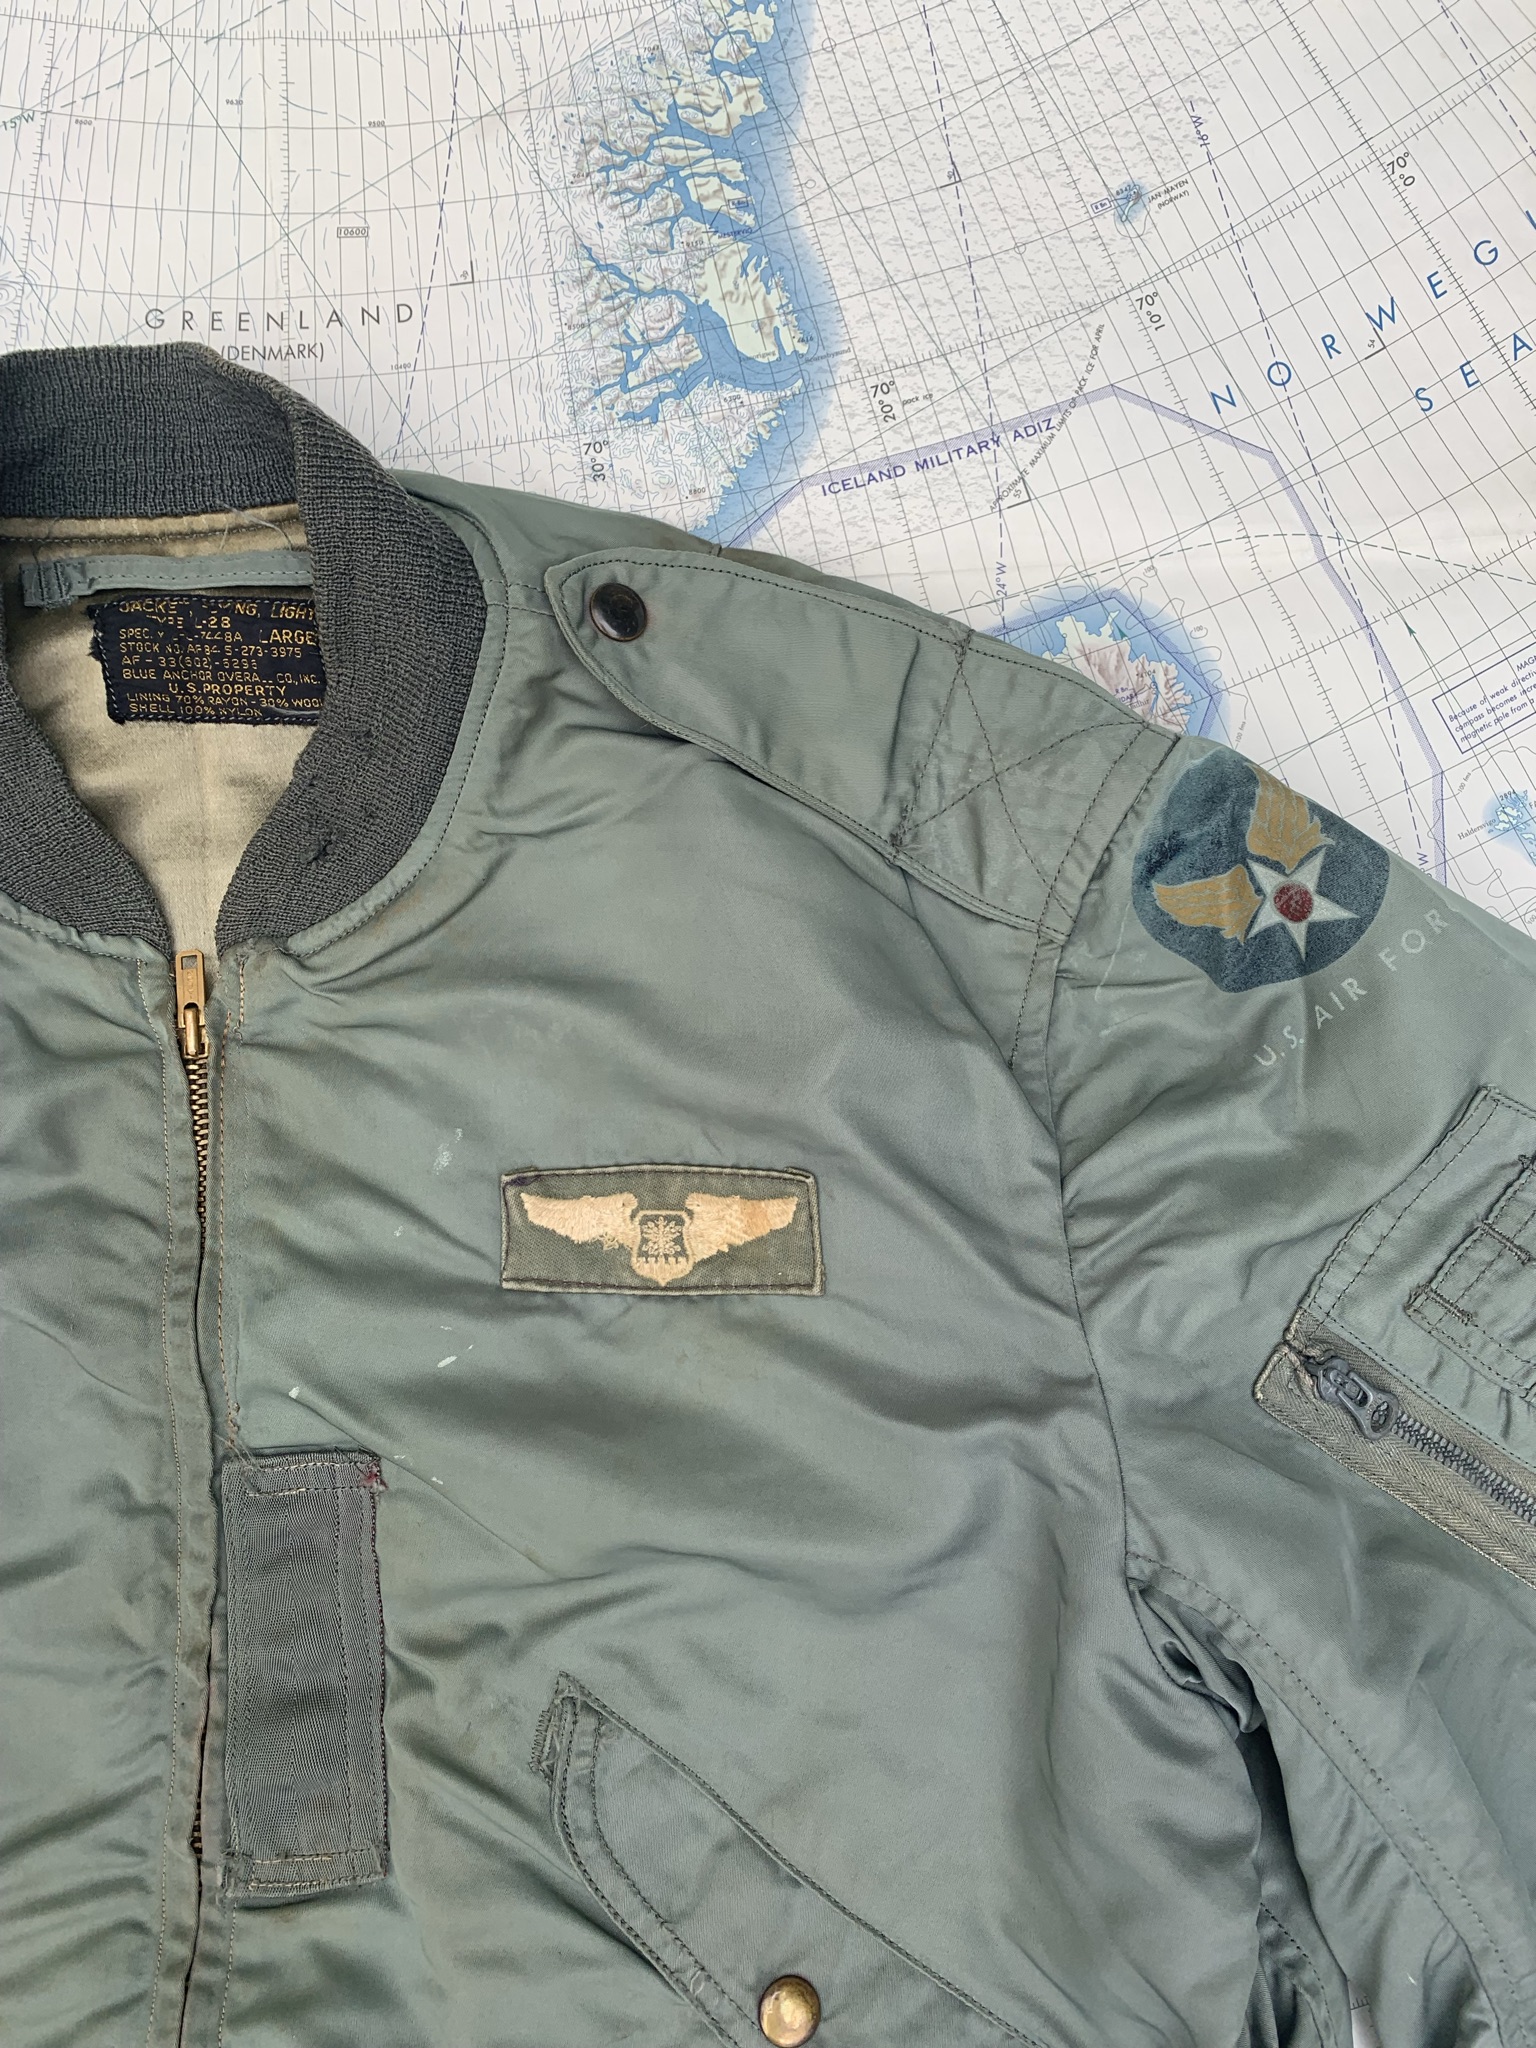 For the nylon jacket fans: L-2B collection | Vintage Leather Jackets Forum